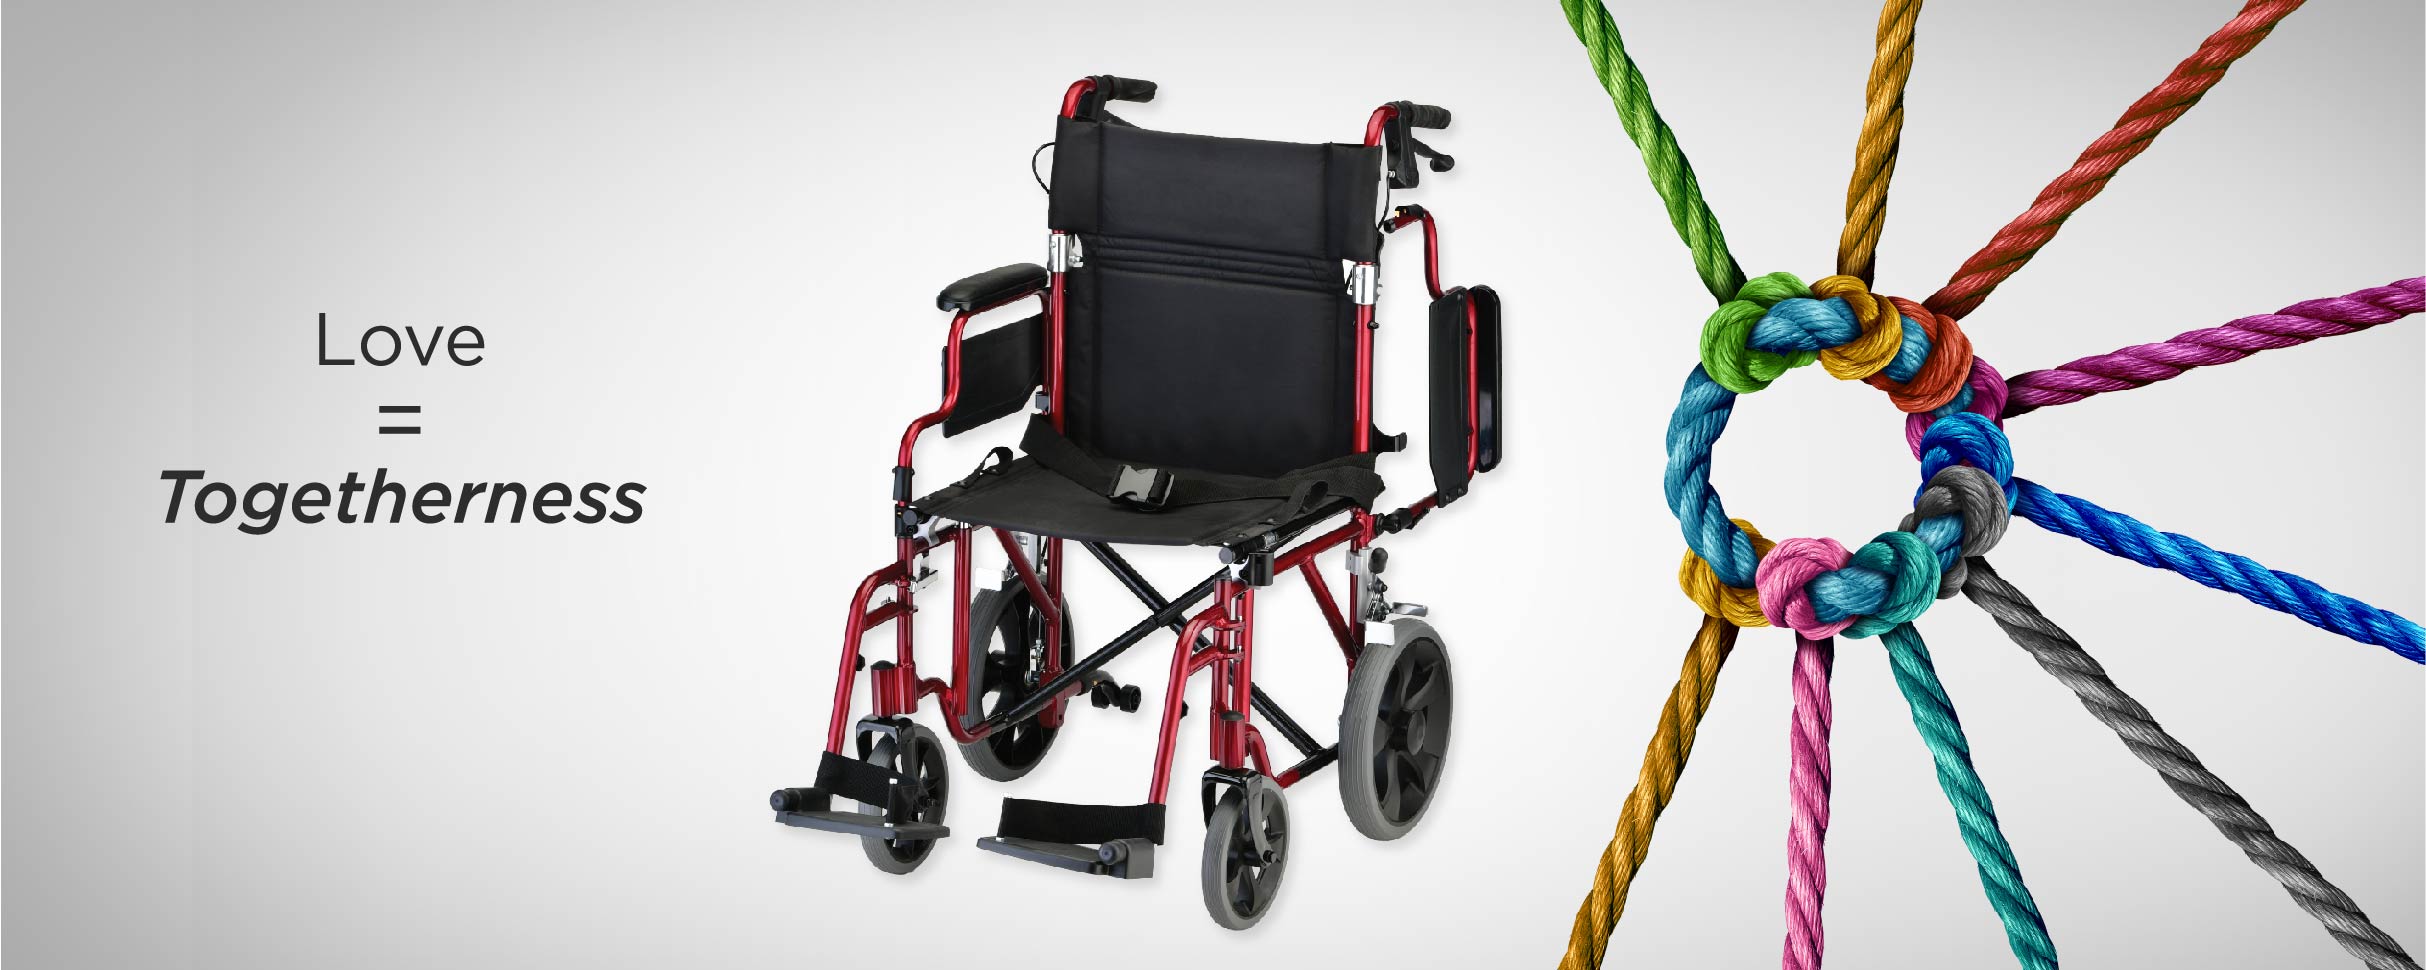 Wheel chair - black with red trim.  Love equals Togetherness